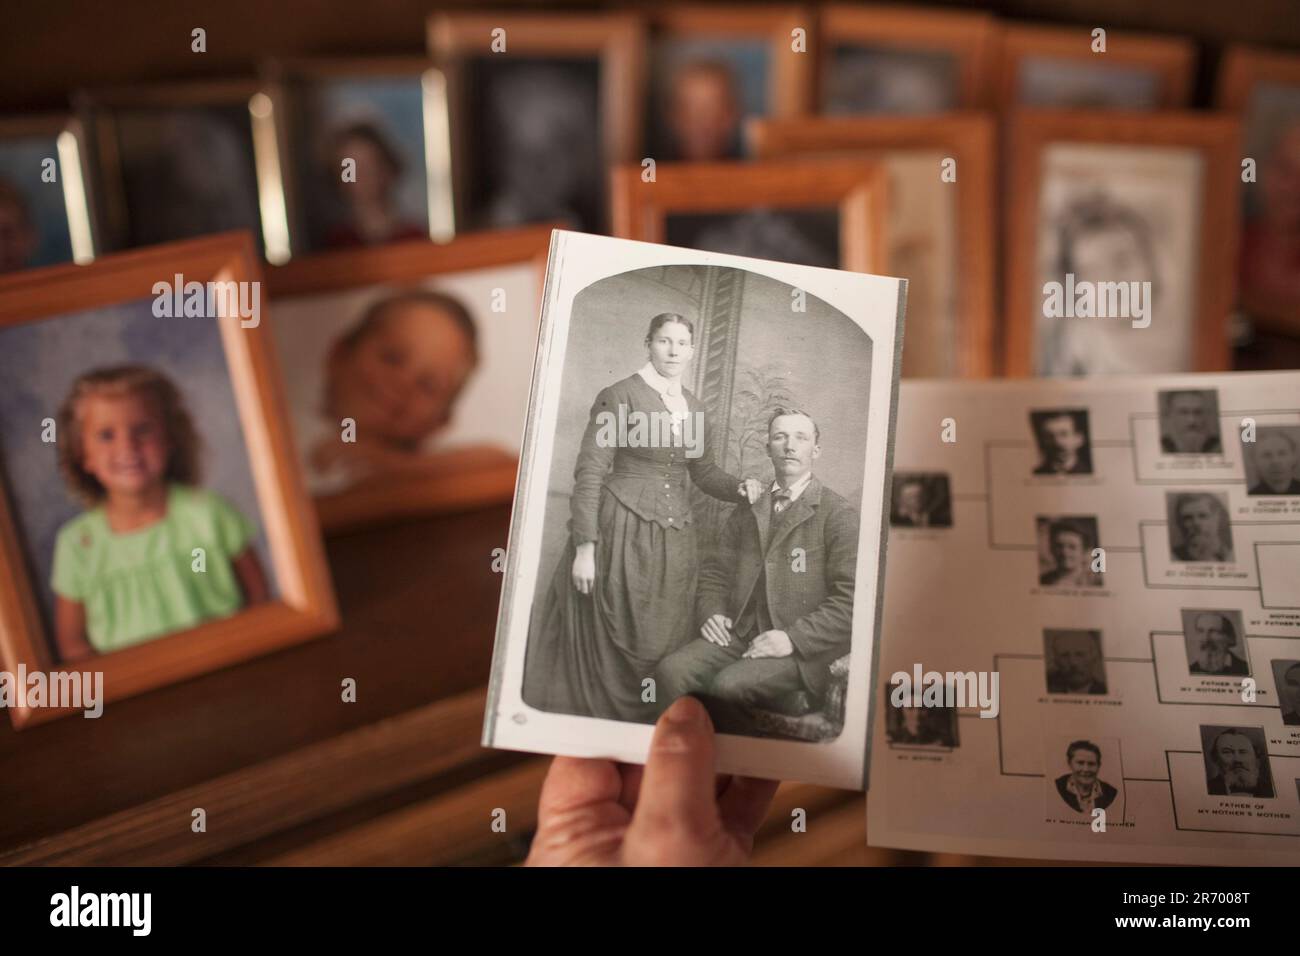 Photographs, old and current, are displayed in the home of an Idaho family. Stock Photo